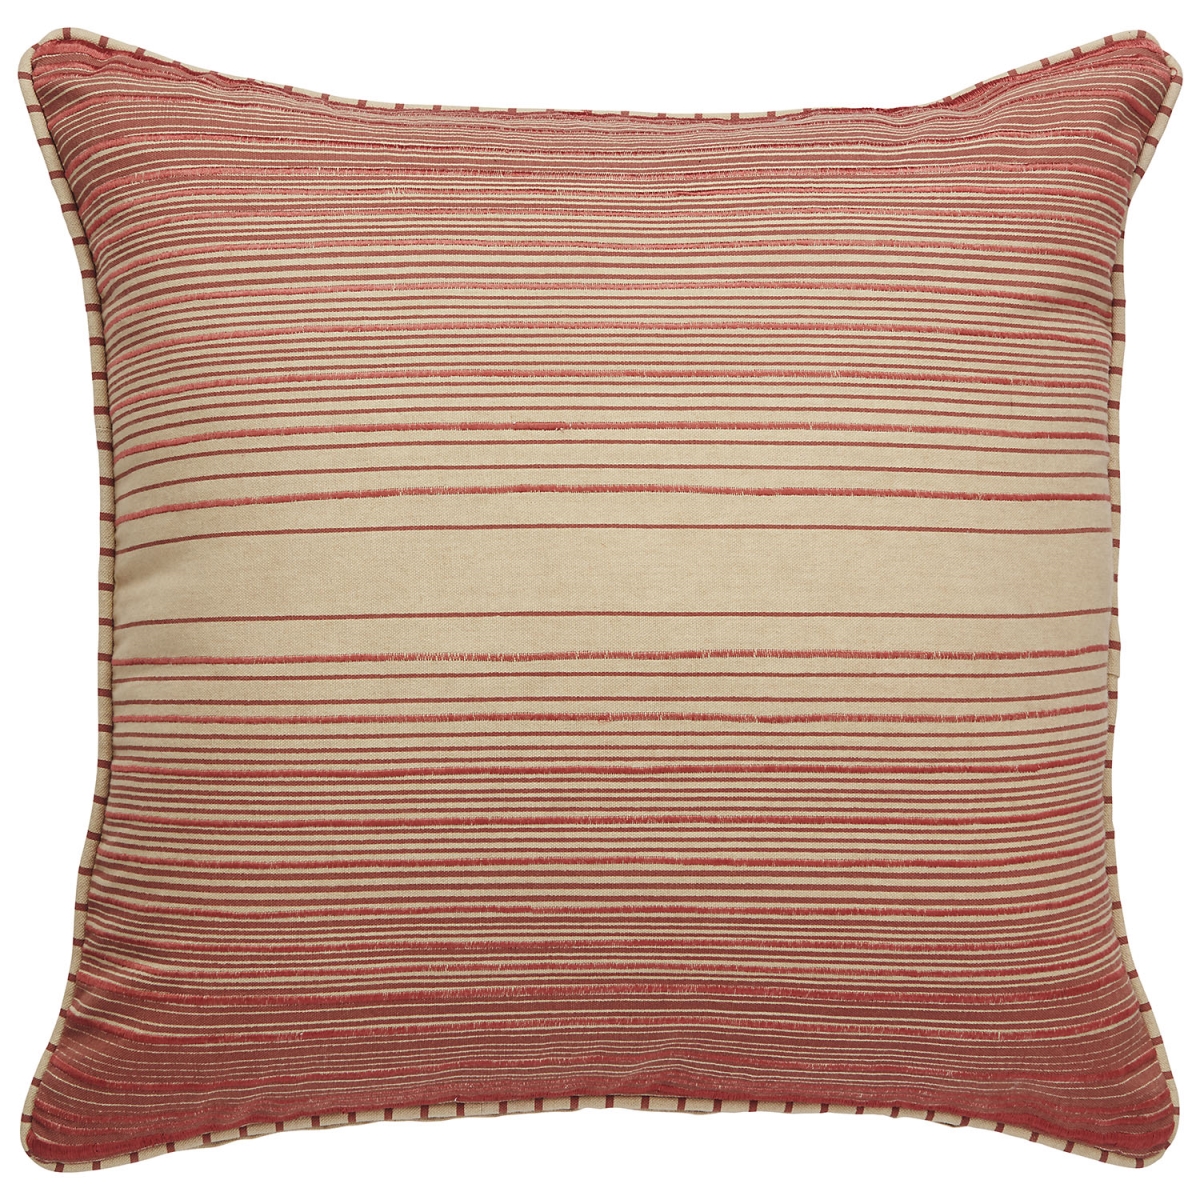 Plw102841 20 X 20 In. Charmed Jennifer Adams Reed Red & Cream Stripe Poly Throw Pillow